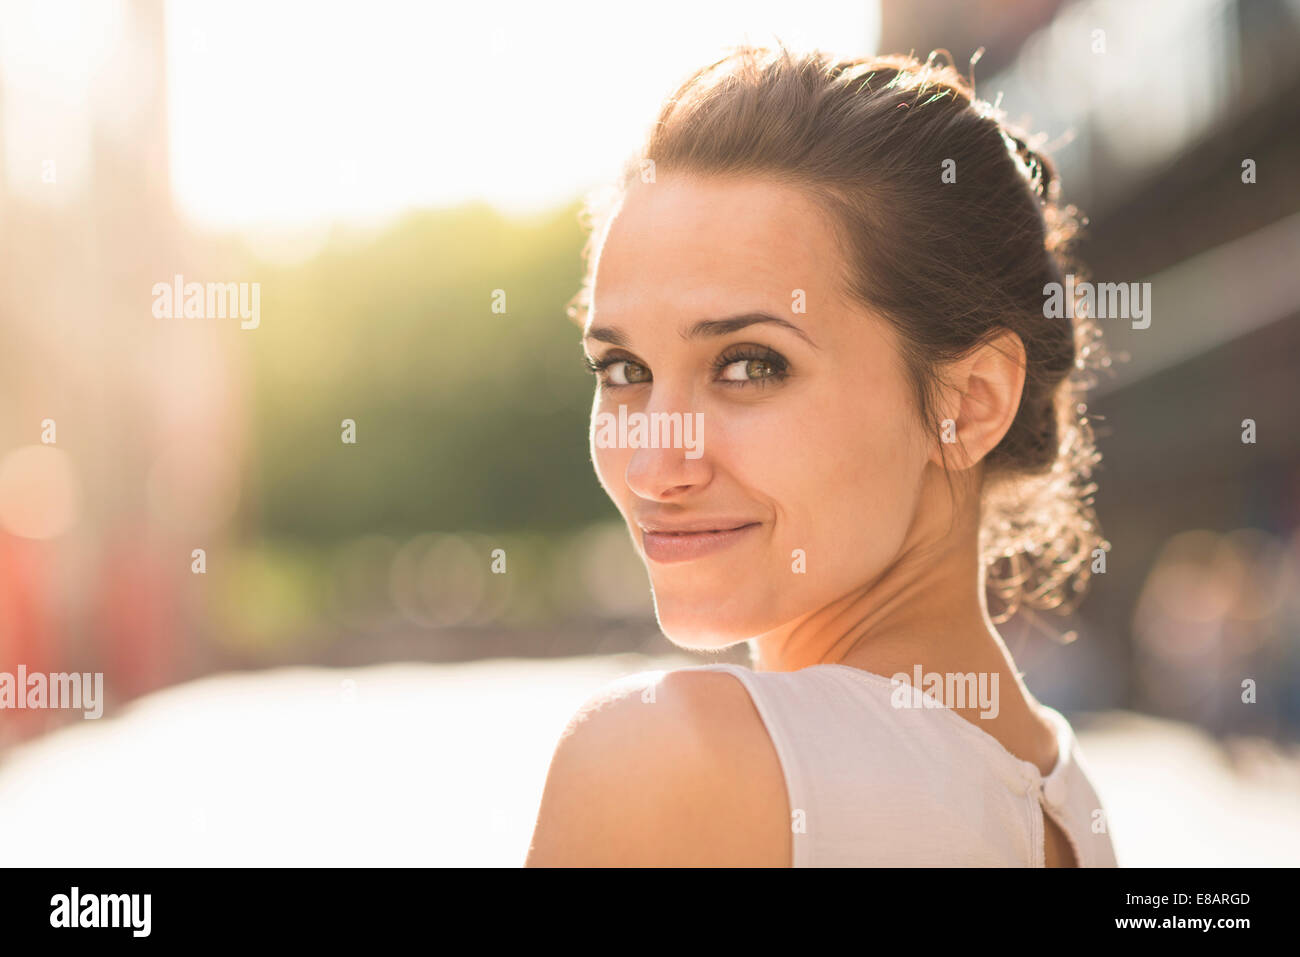 Young woman looking over shoulder towards camera Stock Photo